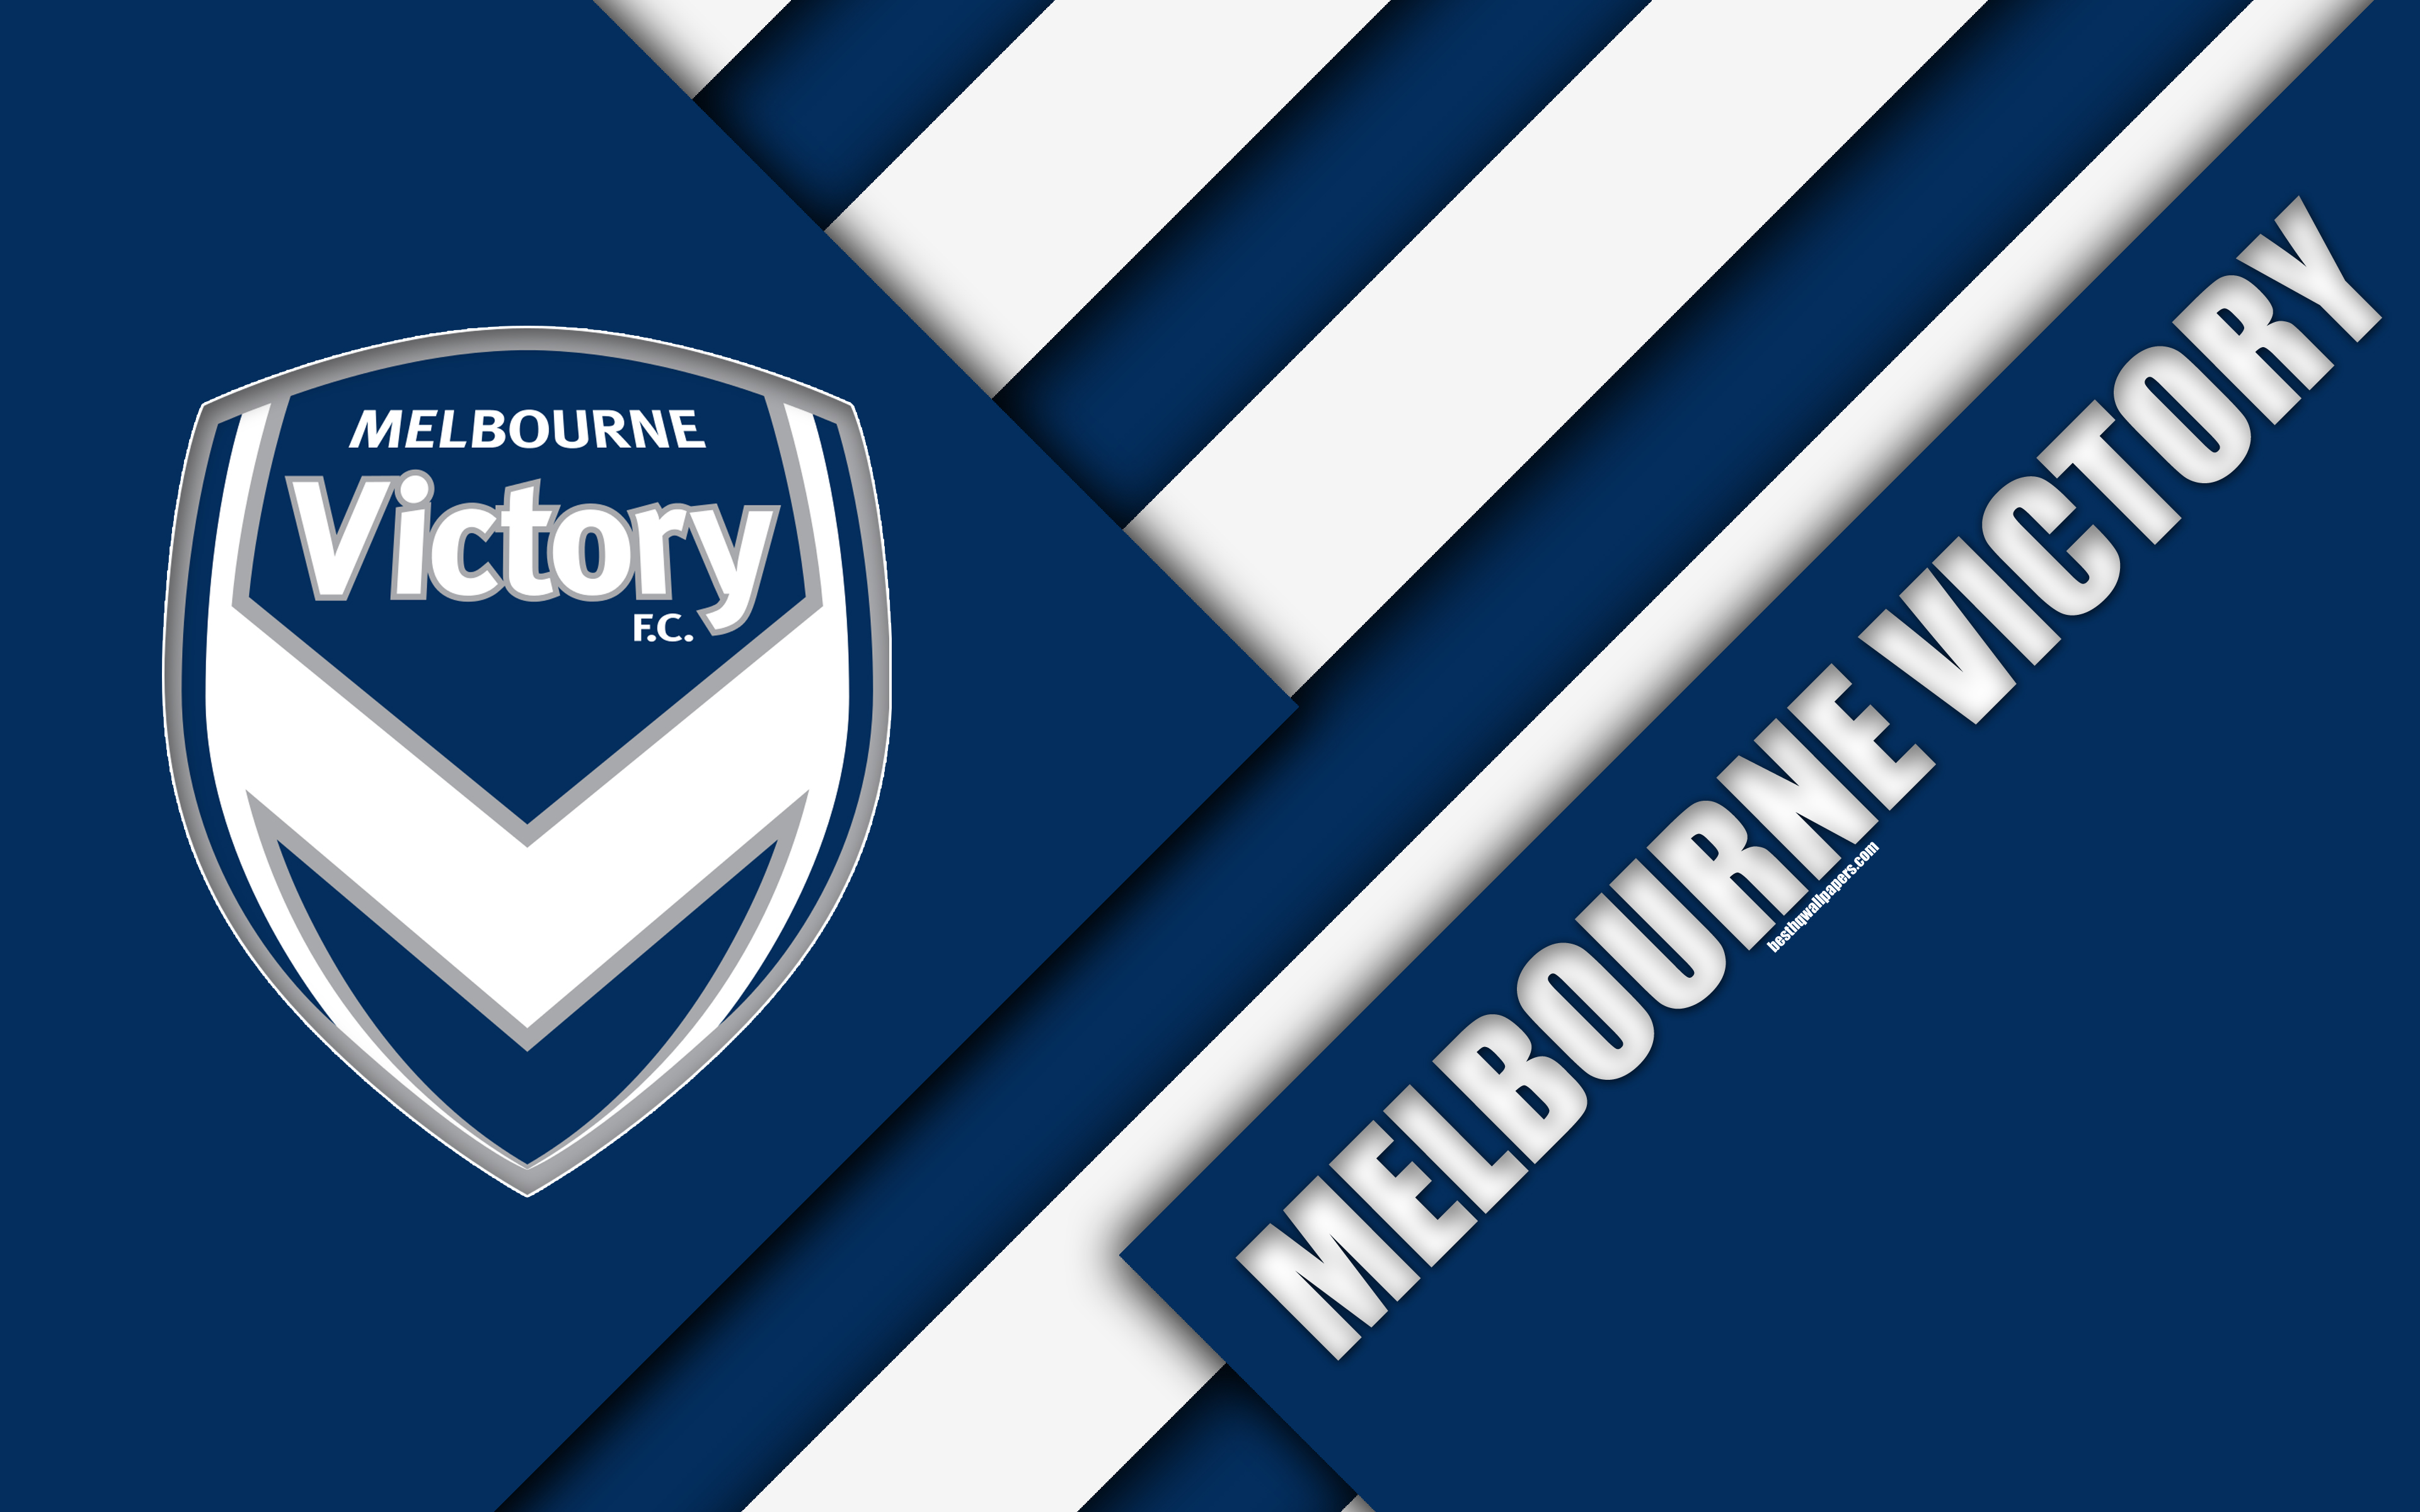 Download melbourne victory fc s for ile phone free melbourne victory fc hd pictures